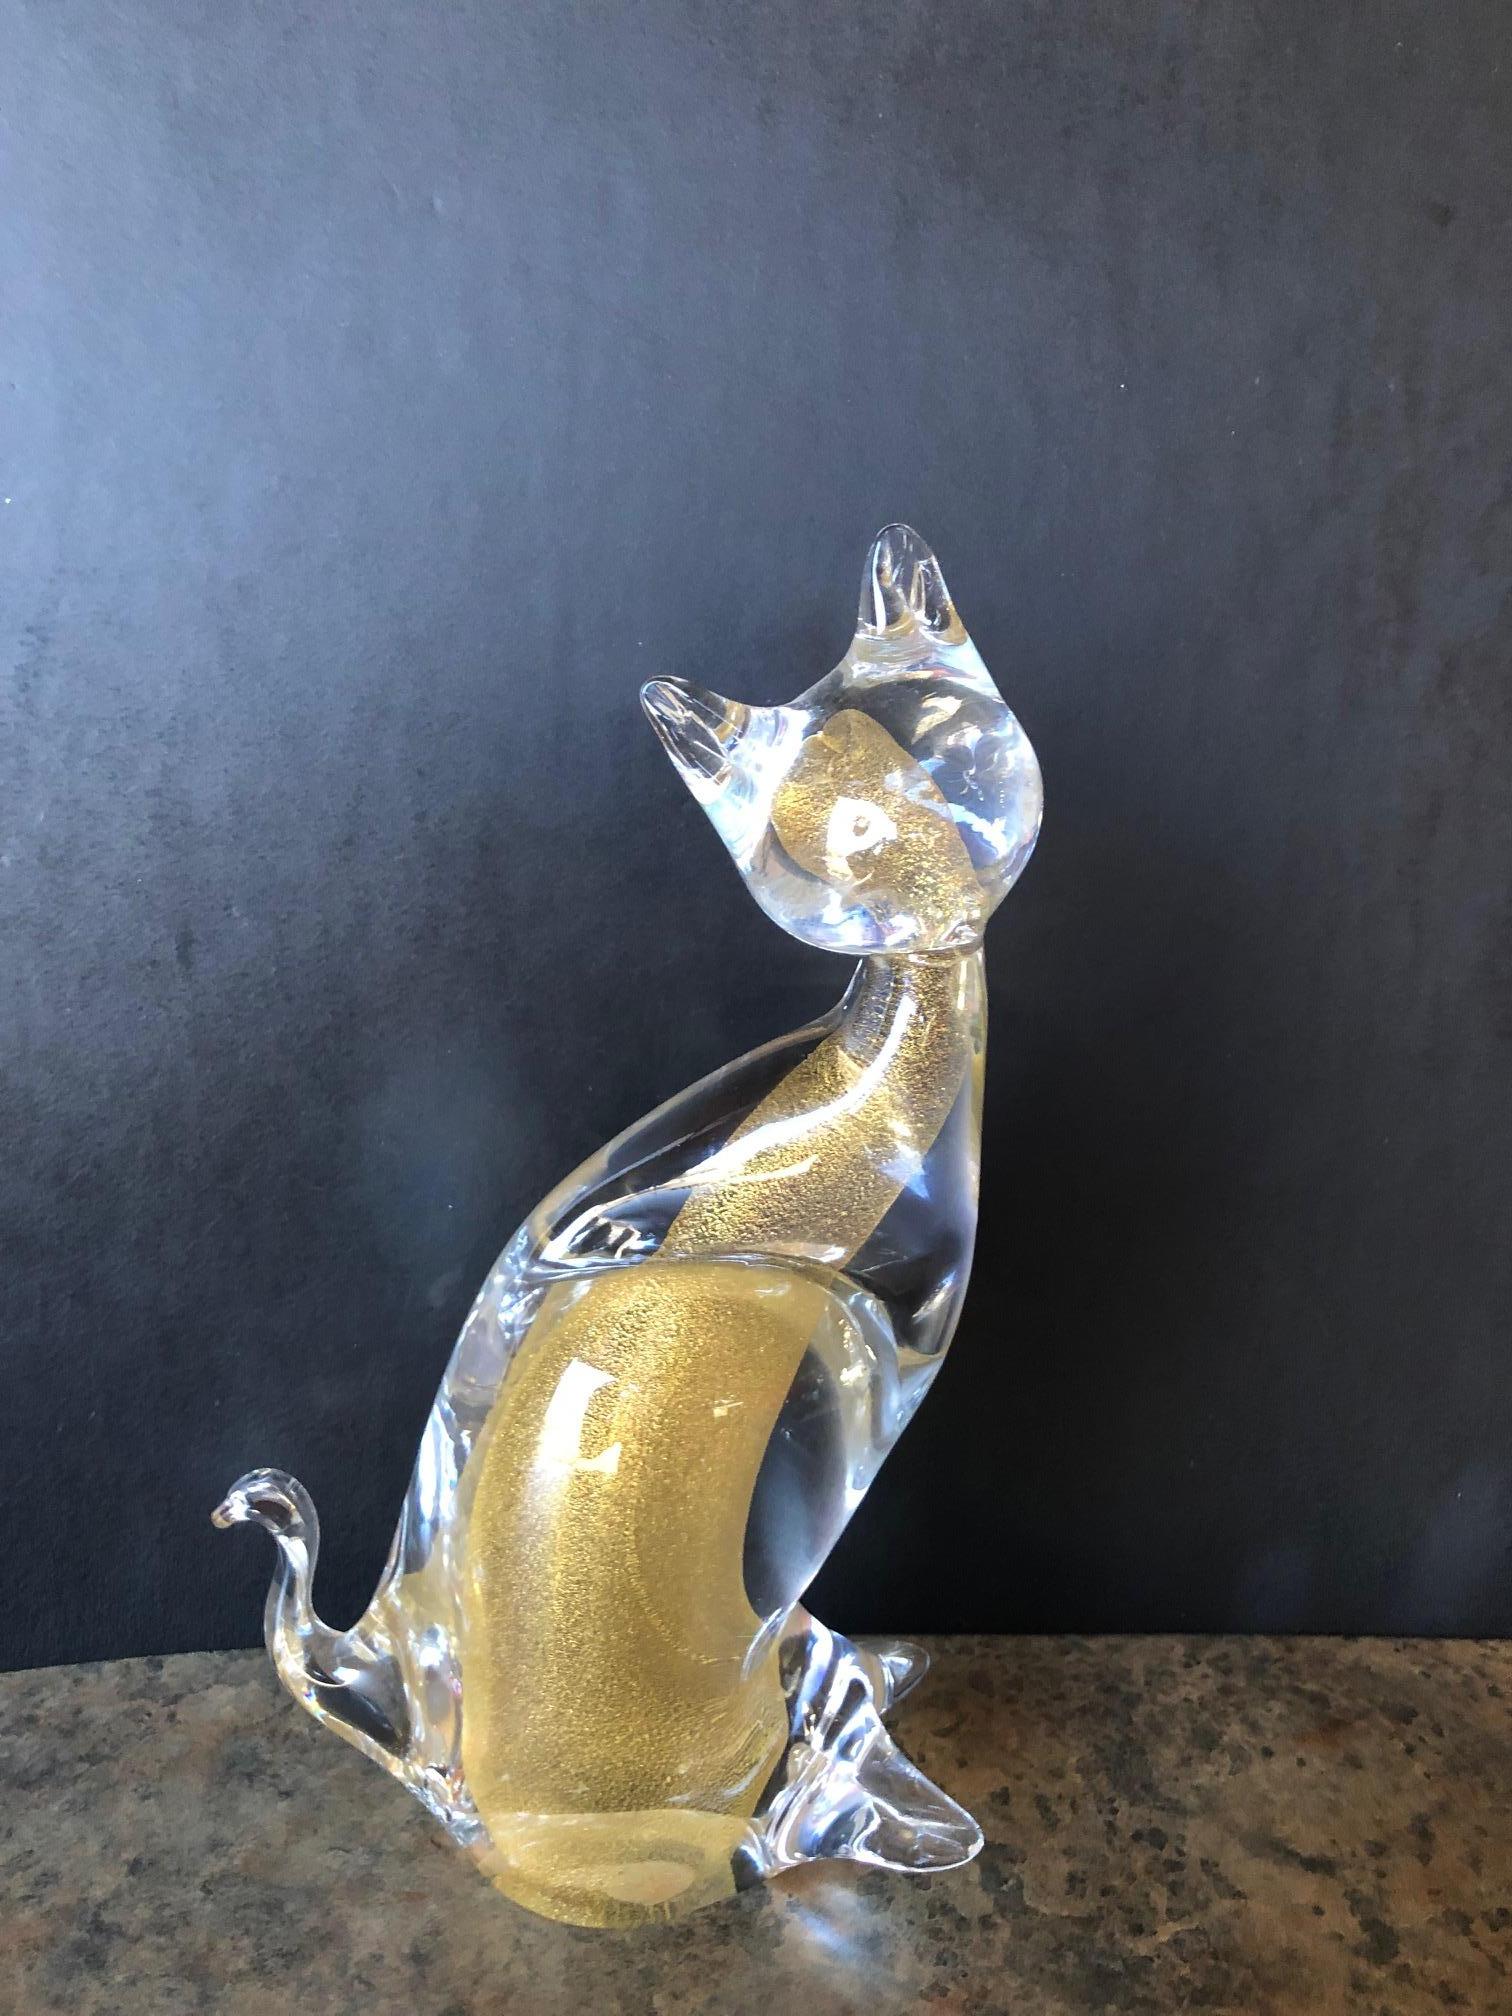 A very nice sommerso art glass cat sculpture by Murano. circa 1980s. The outline of the sculpture is clear blown glass with a shimmering, sparkling gold inner core. Great decorative piece and a must for any cat lover!